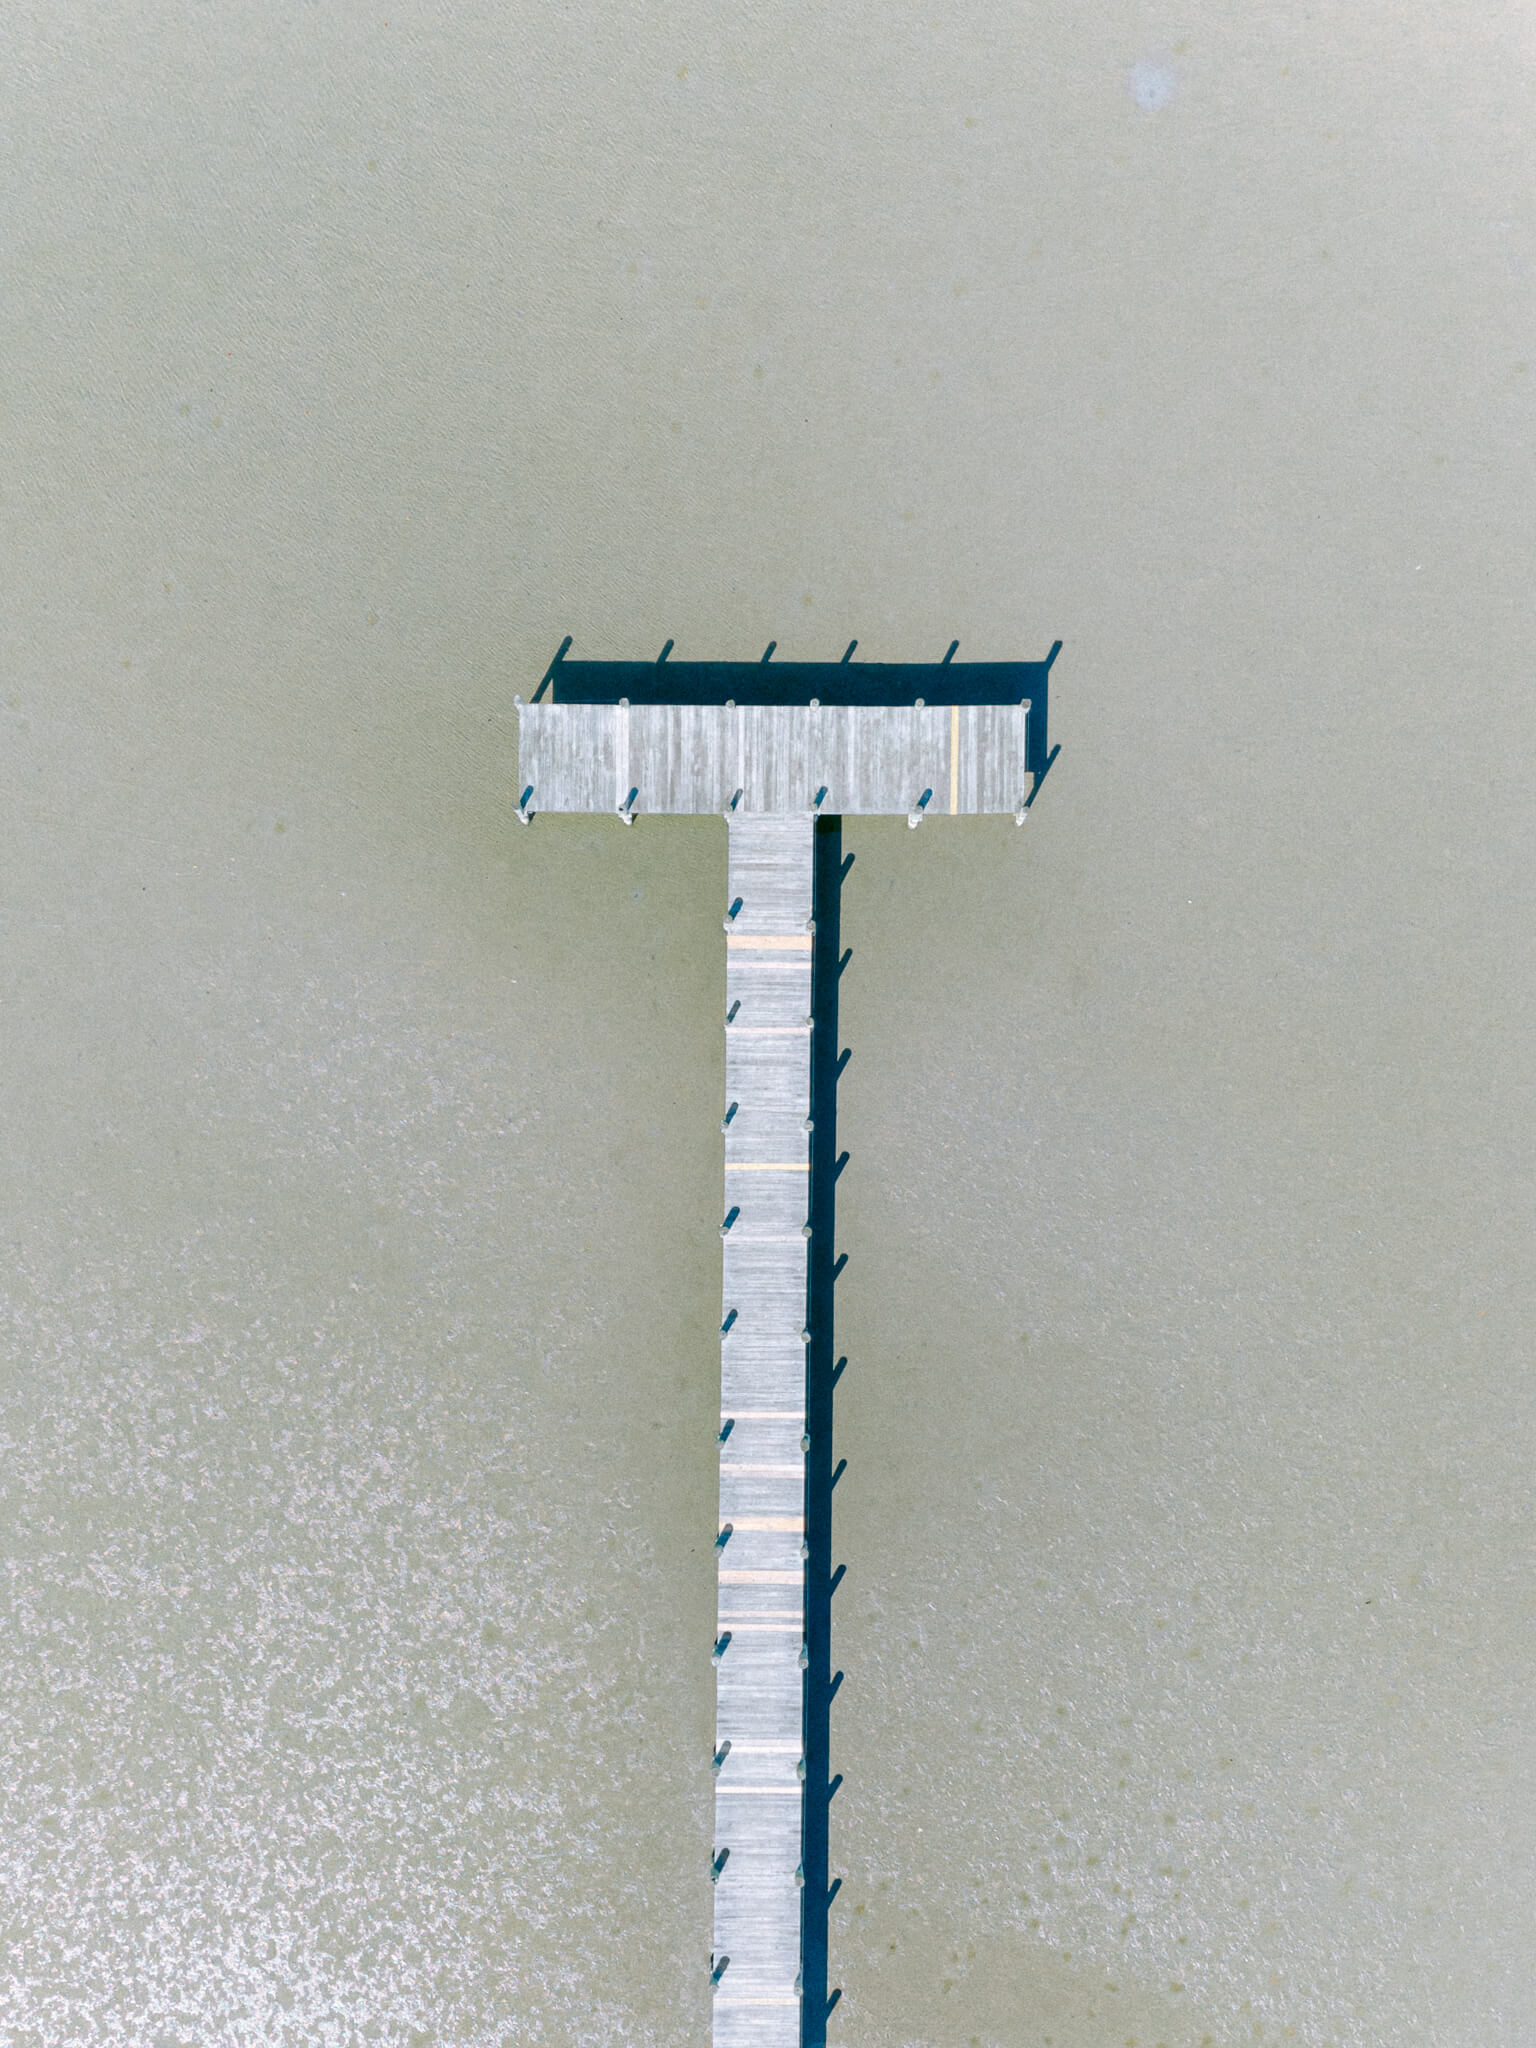 A t-shaped wooden dock in the water photographed from above